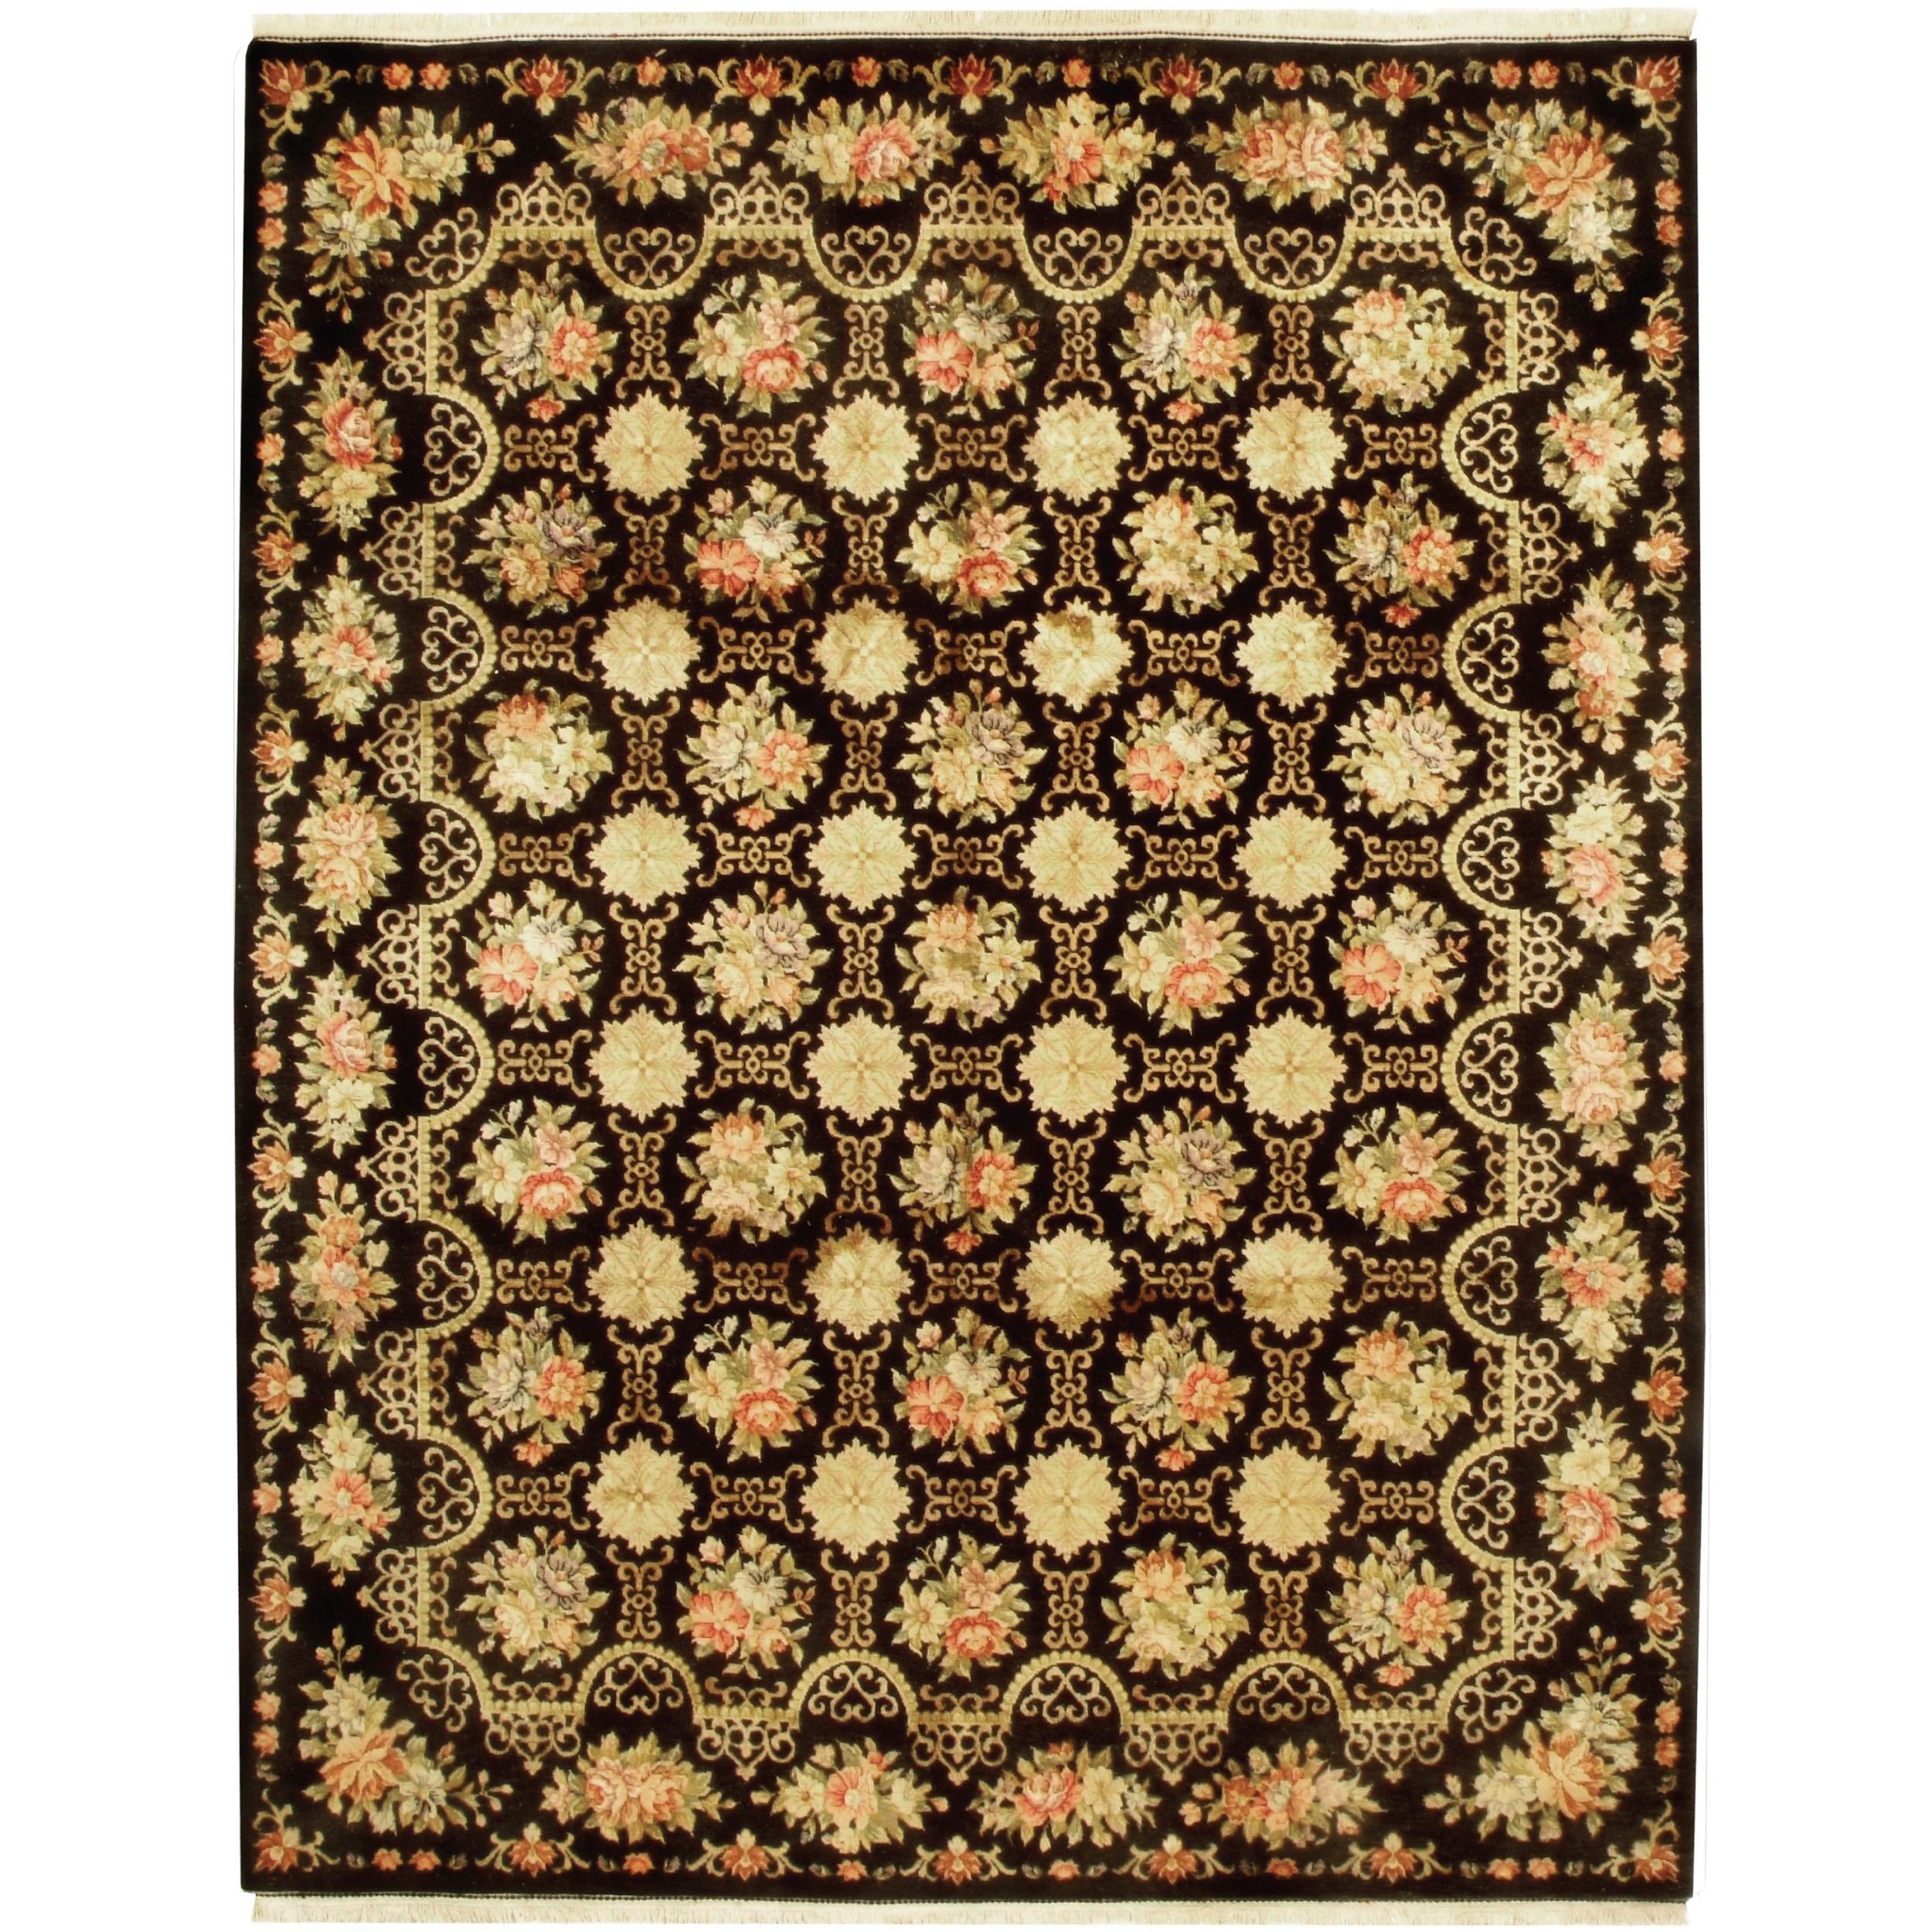 Luxury European Hand-Knotted Cambridge Black 10x14 Rug In New Condition For Sale In Secaucus, NJ